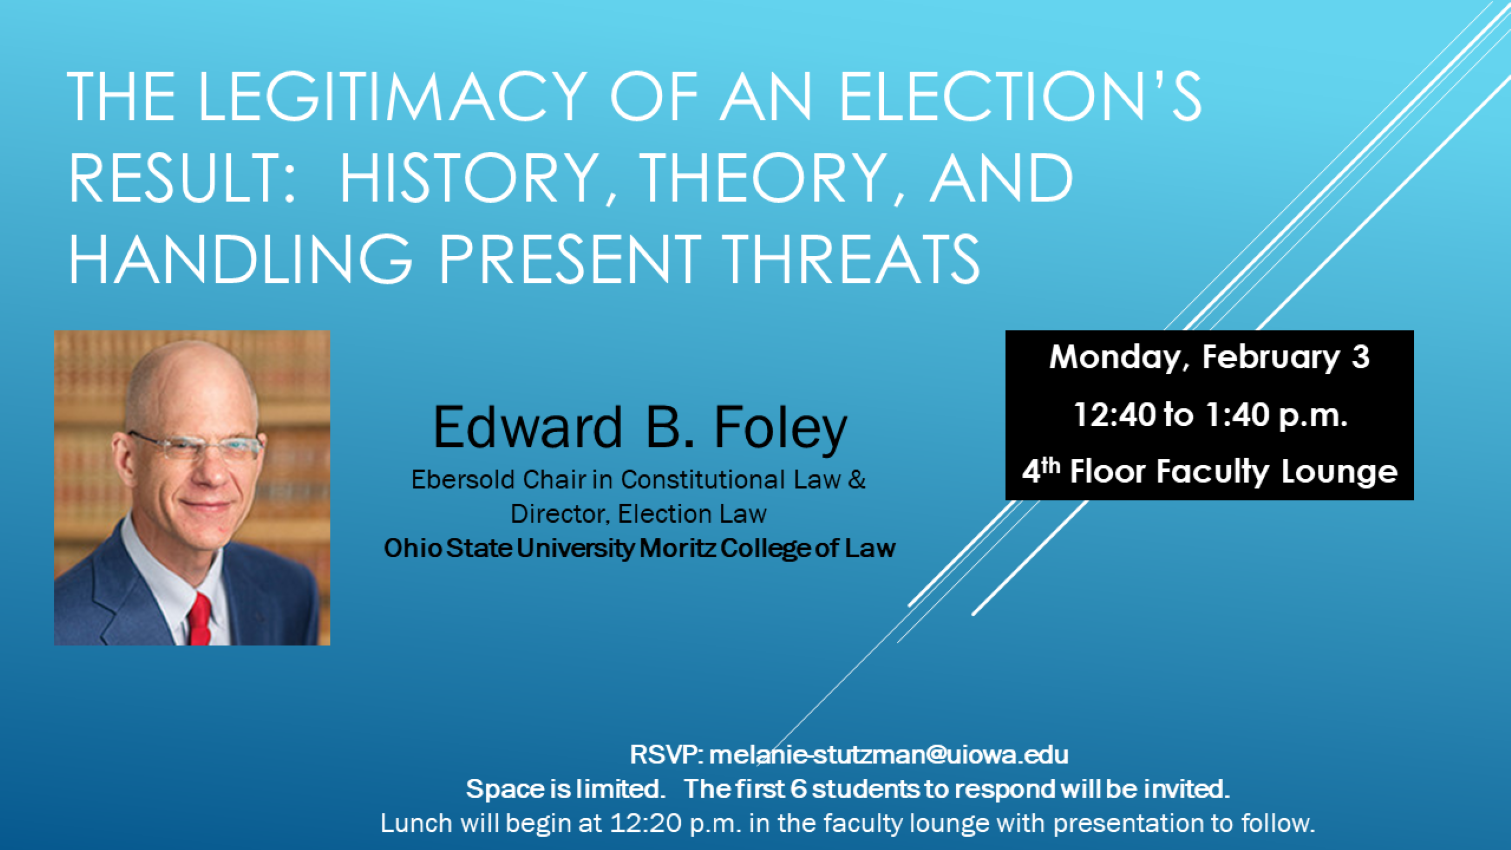 The Legitimacy of An Election's Result: History, Theory, and Handling Present Threats. Edward B. Foley, Ebersold Chair in Constitutioinal Law and Director, Election Law, Ohioa State Univesrity Moritz College of Law. Monday February 3rd, 12:40 - 1:40 pm, 4th Floor Faculty Lounge. RSVP: melanie-stutzman@uiowa.edu. Space is limited, the first 6 students to respond will be invited. Lunch will begin at 12:20 pm in the faculty lounge with presentation to follow. 